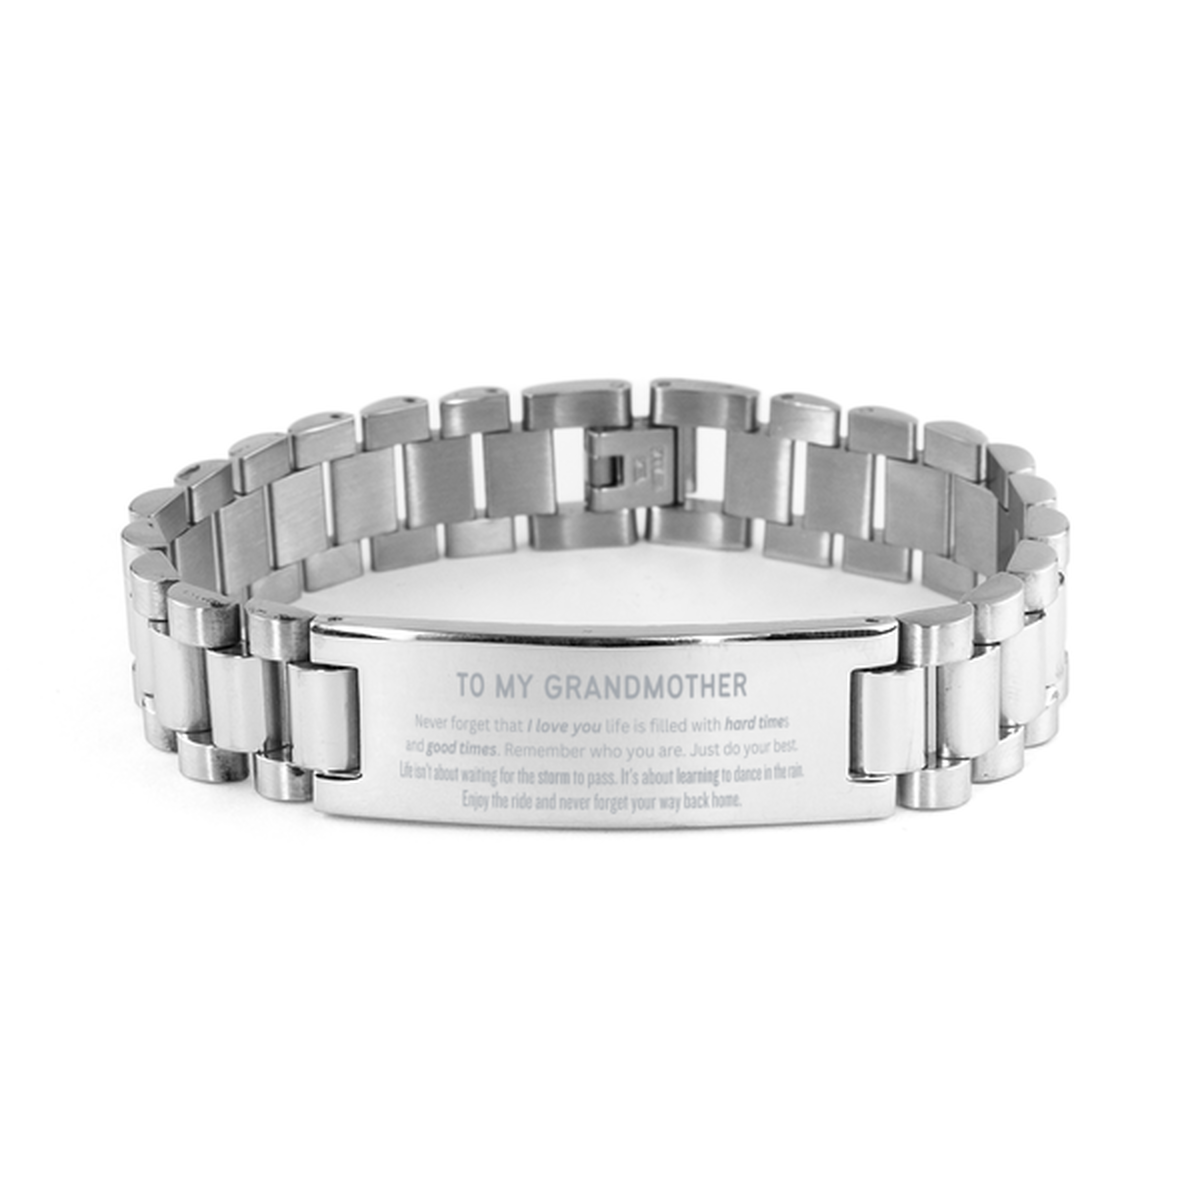 Christmas Grandmother Ladder Stainless Steel Bracelet Gifts, To My Grandmother Birthday Thank You Gifts For Grandmother, Graduation Unique Gifts For Grandmother To My Grandmother Never forget that I love you life is filled with hard times and good times.